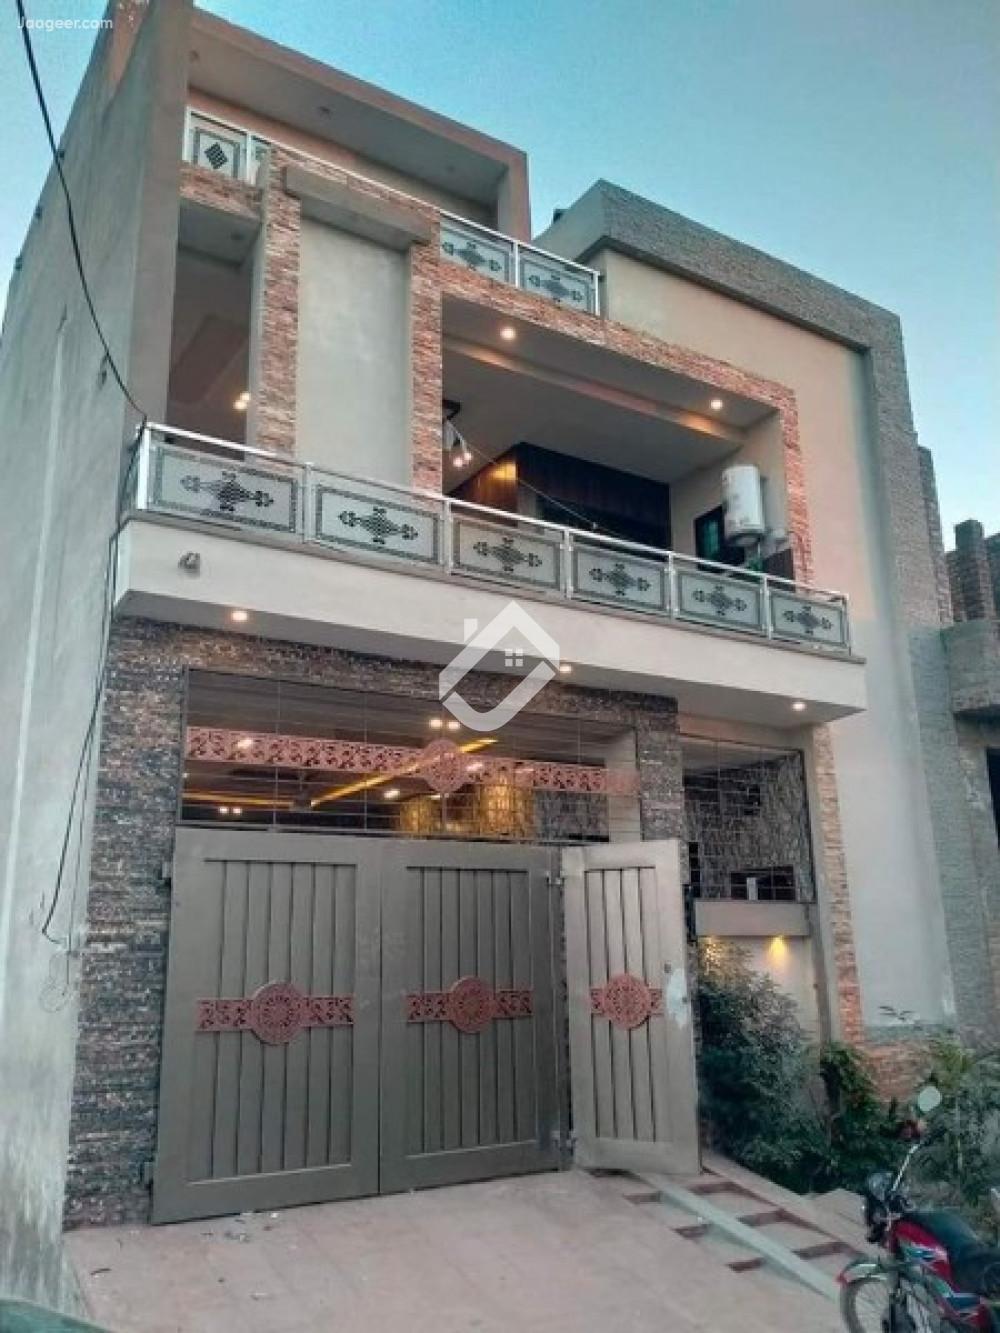 View  5 Marla Double Storey House For Sale In Model City Near LGS School Link PAF Road  in Model City, Sargodha